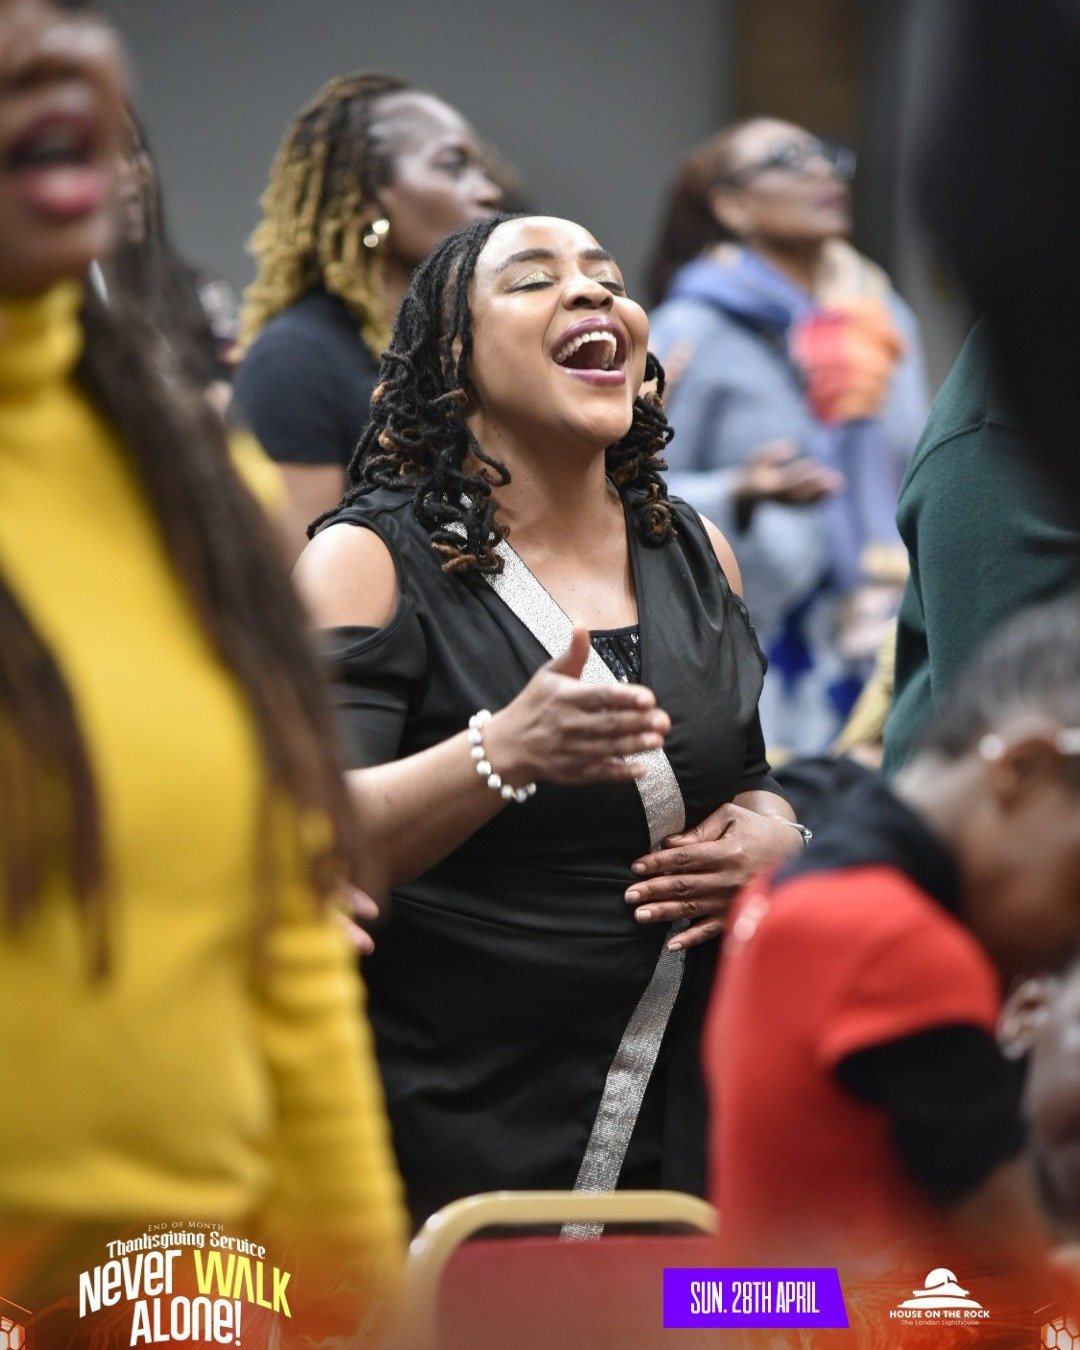 There was a great vibe in the House this morning, in the presence of God. Thankfulness, gratefulness, joyfulness, you name it - we had it! What a way to end our Sunday's in April! It was a wonderful End of Month Thanksgiving Service and we bless God 